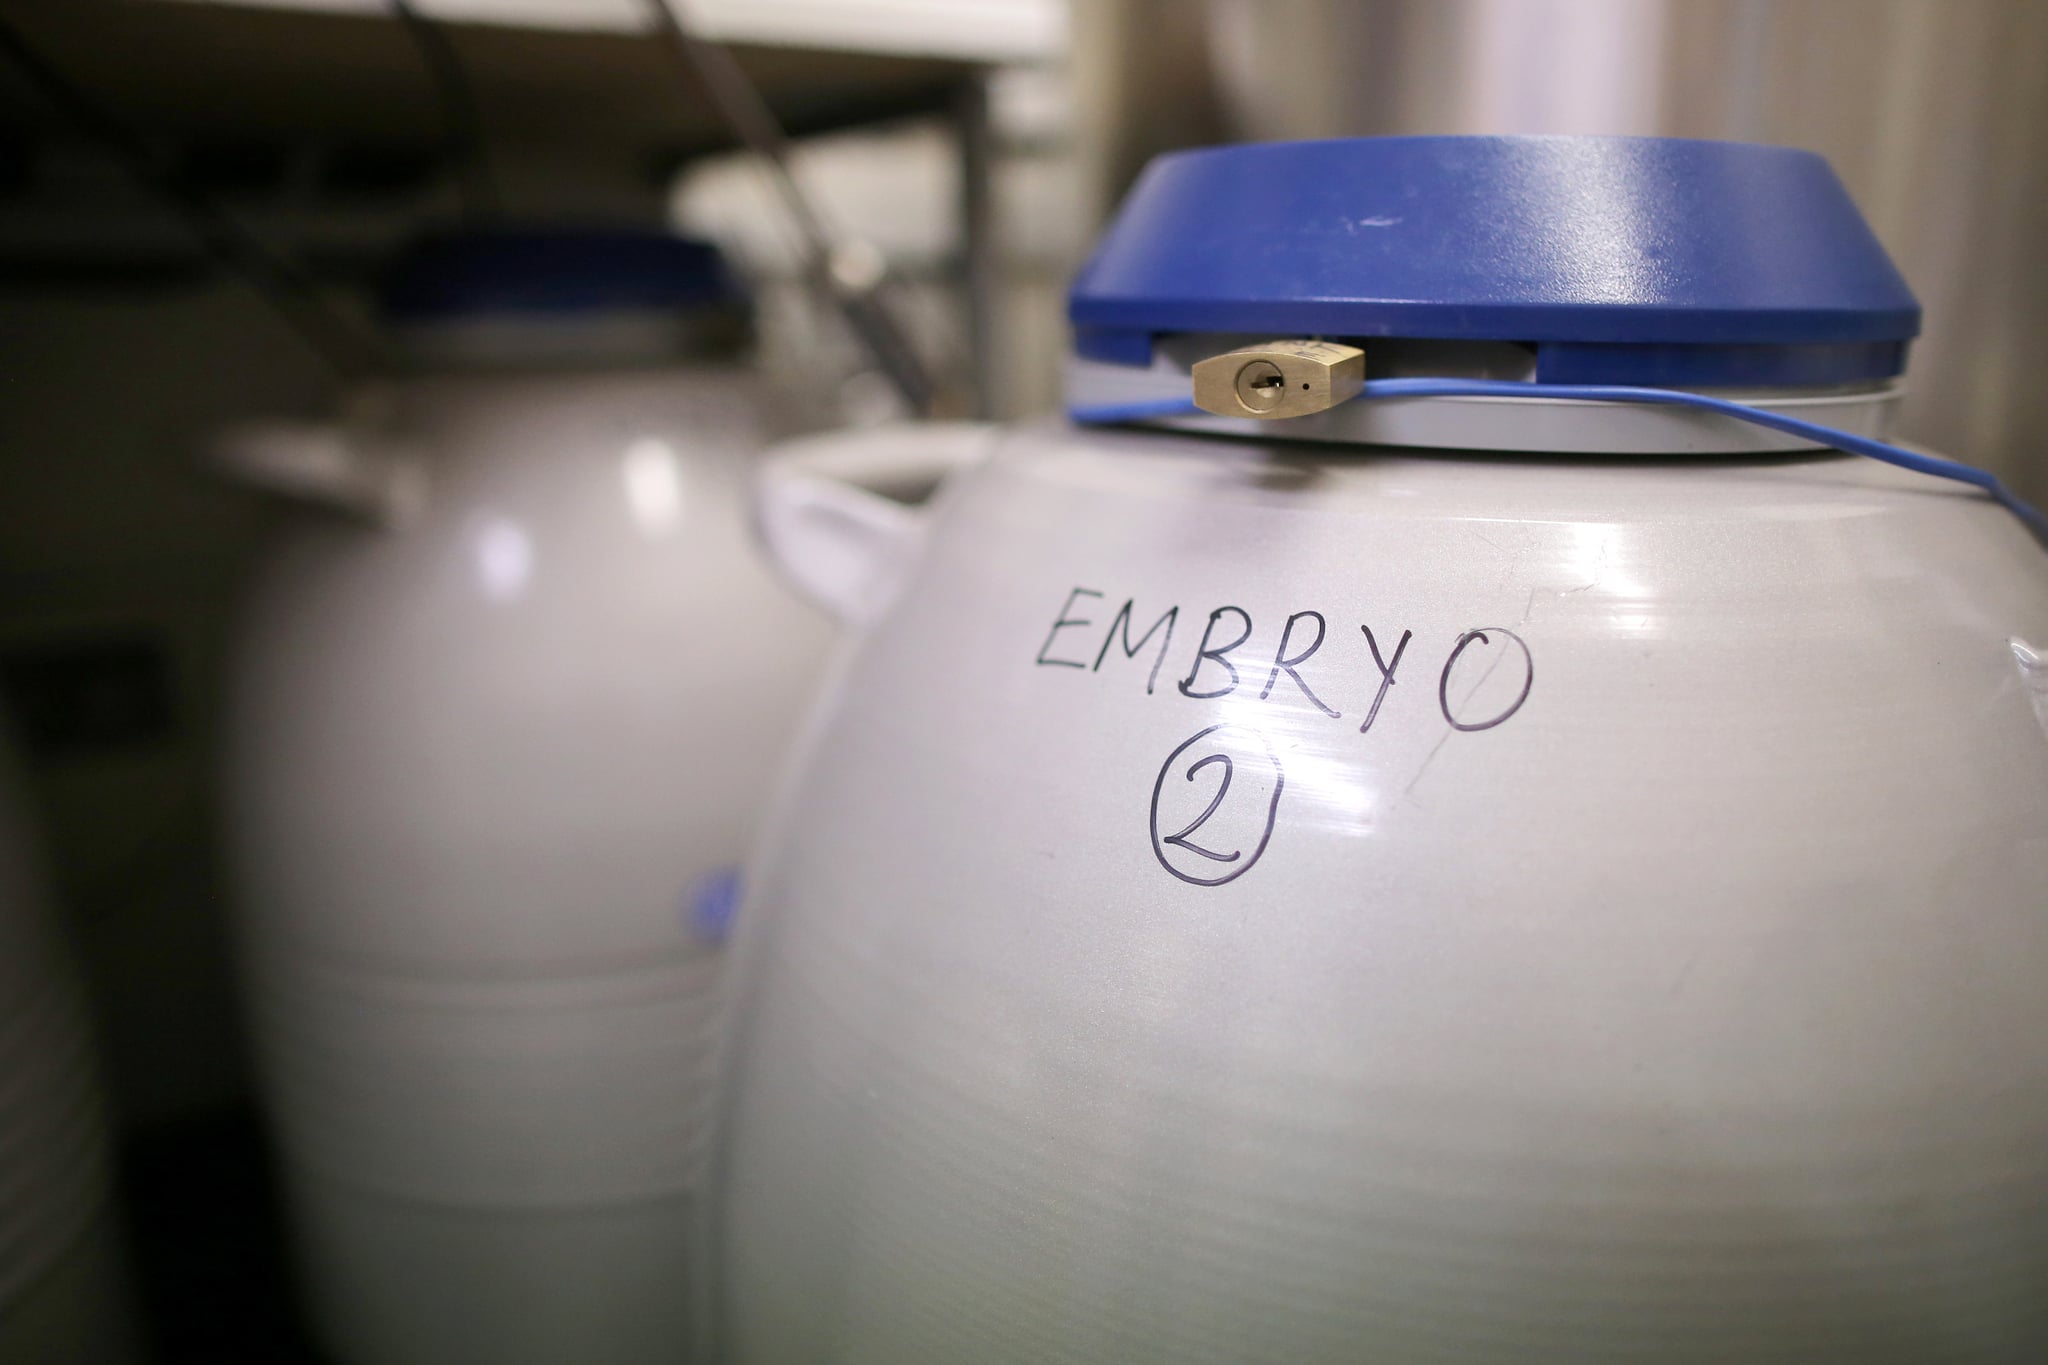 BIRMINGHAM, ENGLAND - JANUARY 22:  Embryos are frozen and stored in the cryo store at Birmingham Women's Hospital fertility clinic on January 22, 2015 in Birmingham, England. Birmingham Womens Hospital provides a range of health services to women and their families using the latest scientific procedures and care. Last year the maternity unit delivered over 8,000 babies, cared for 50,000 patients and performed over 3000 procedures in its state of the art theatres. The hospital is also home to world renowned research  scientists, fertility clinic and the national sperm bank.  (Photo by Christopher Furlong/Getty Images)